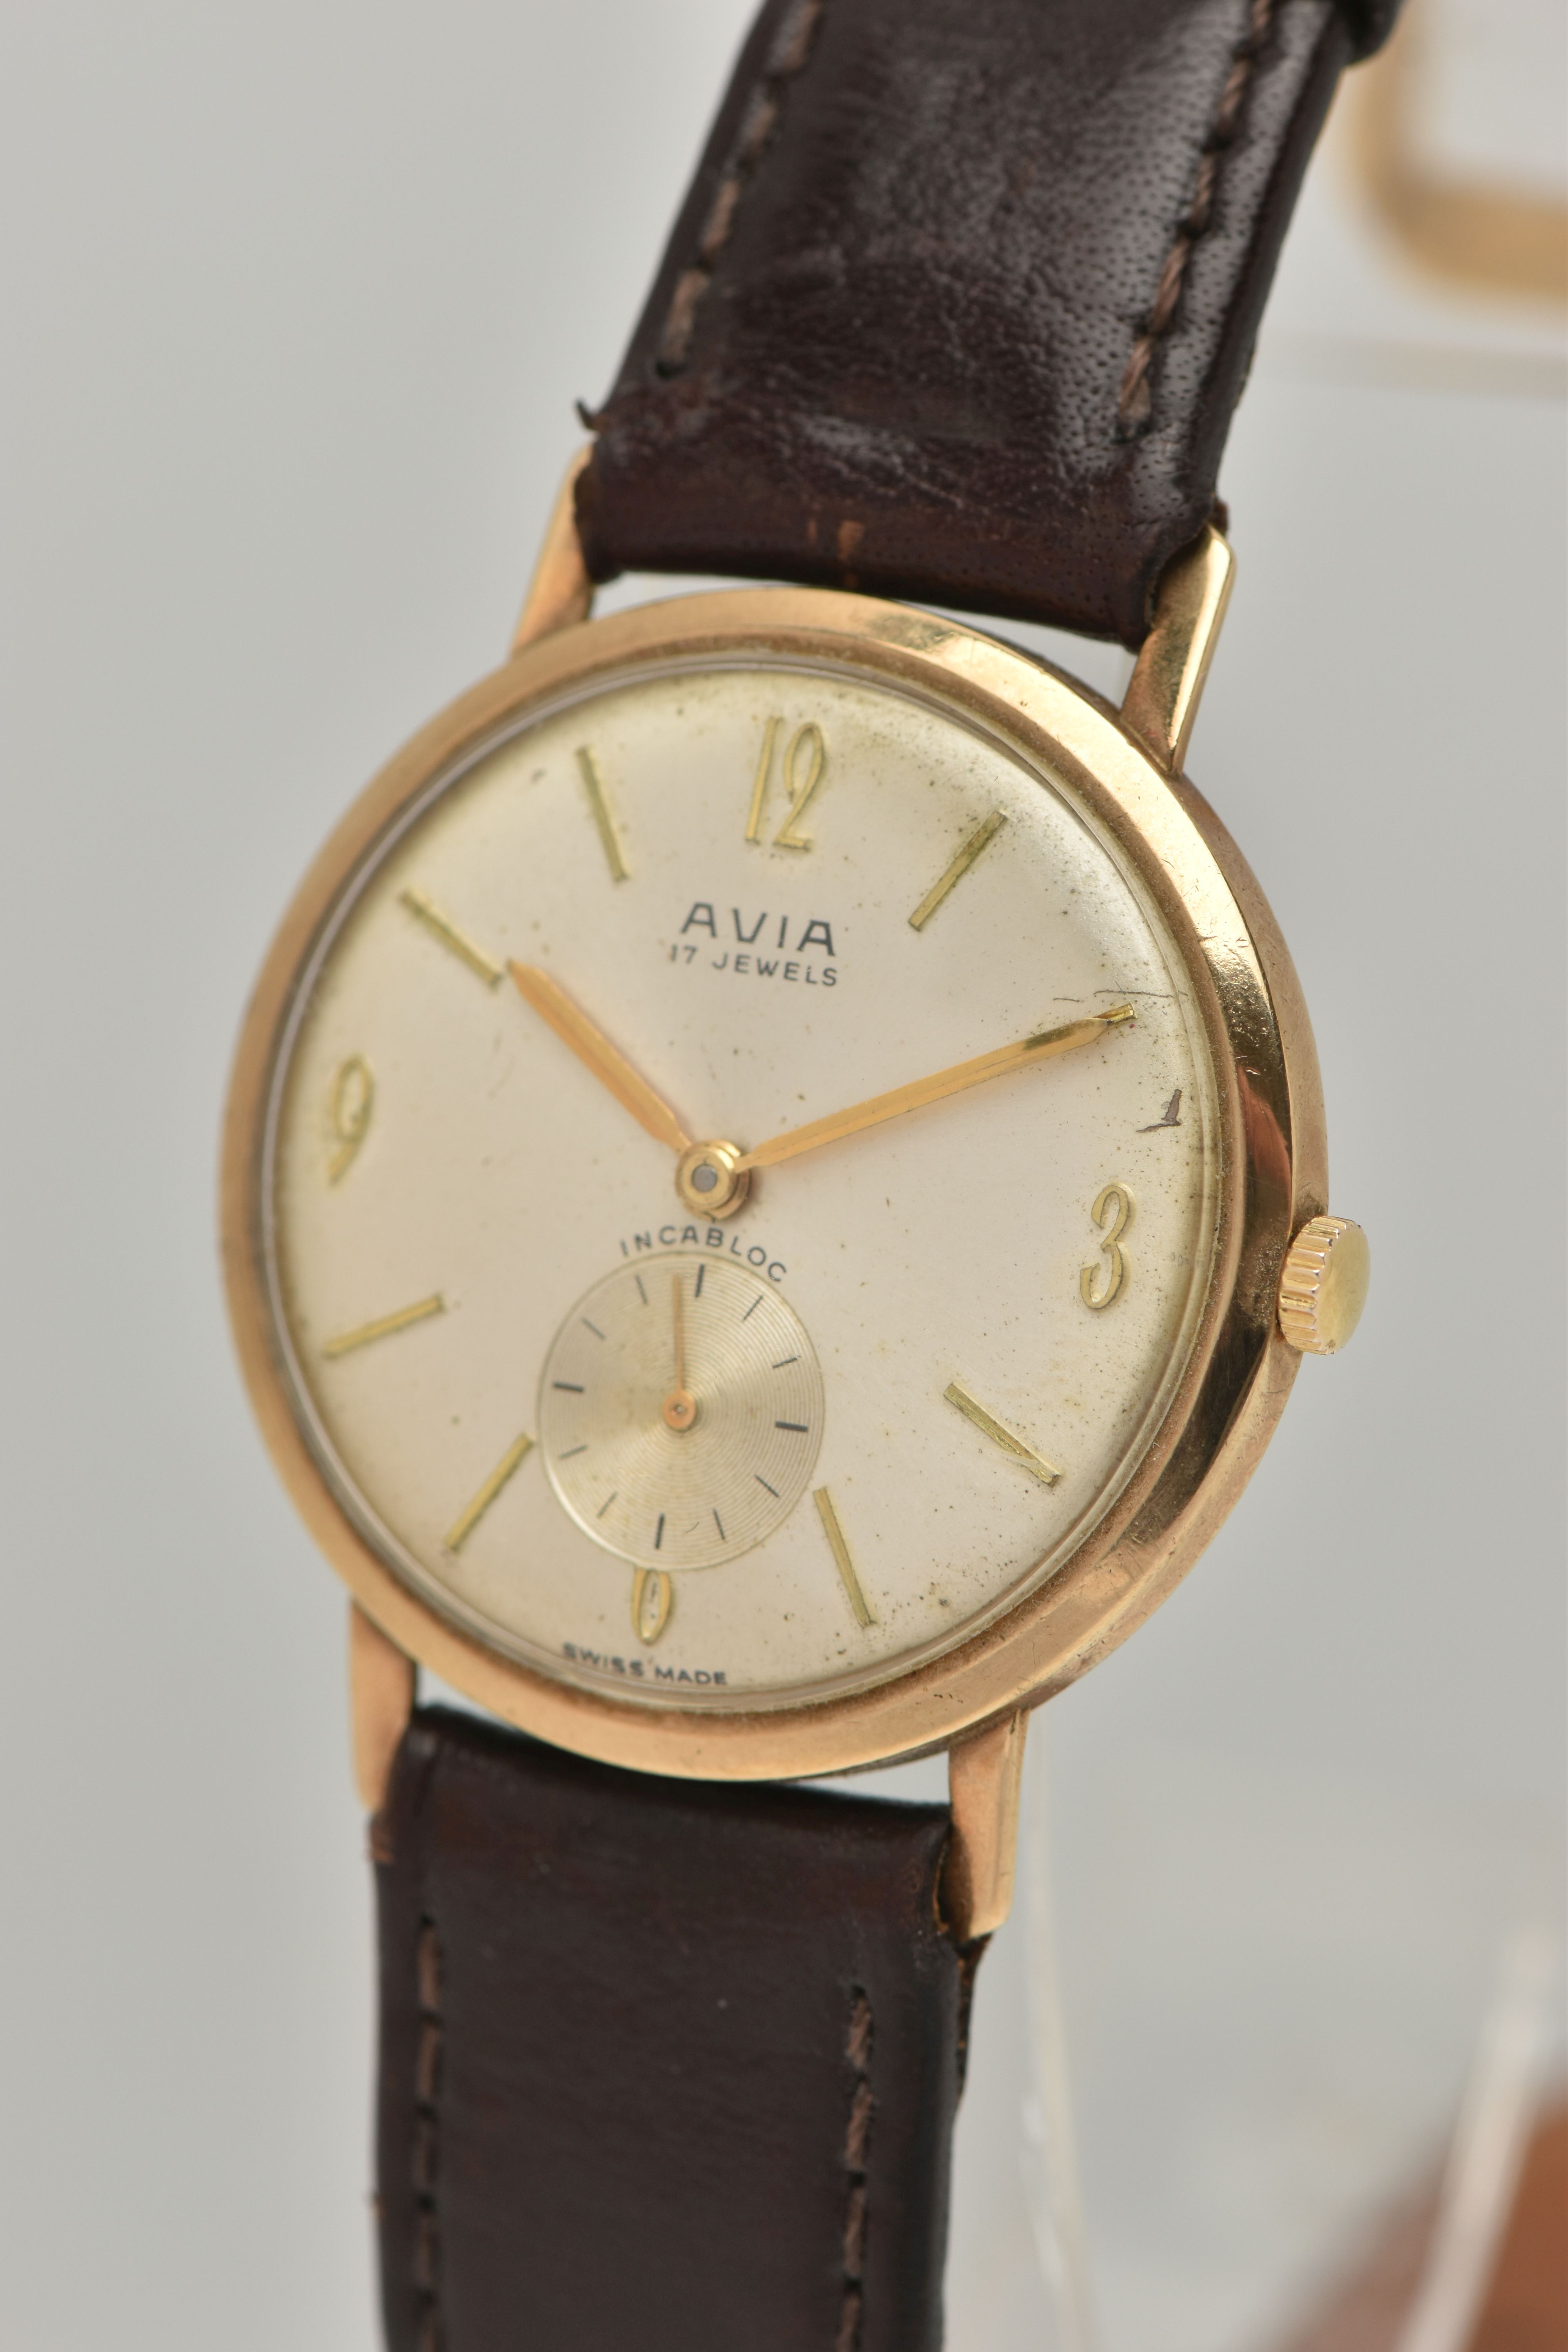 A GENTS 9CT GOLD 'AVIA' WRISTWATCH, manual wind, round silvered dial signed 'Avia 17 Jewels', Arabic - Image 2 of 6